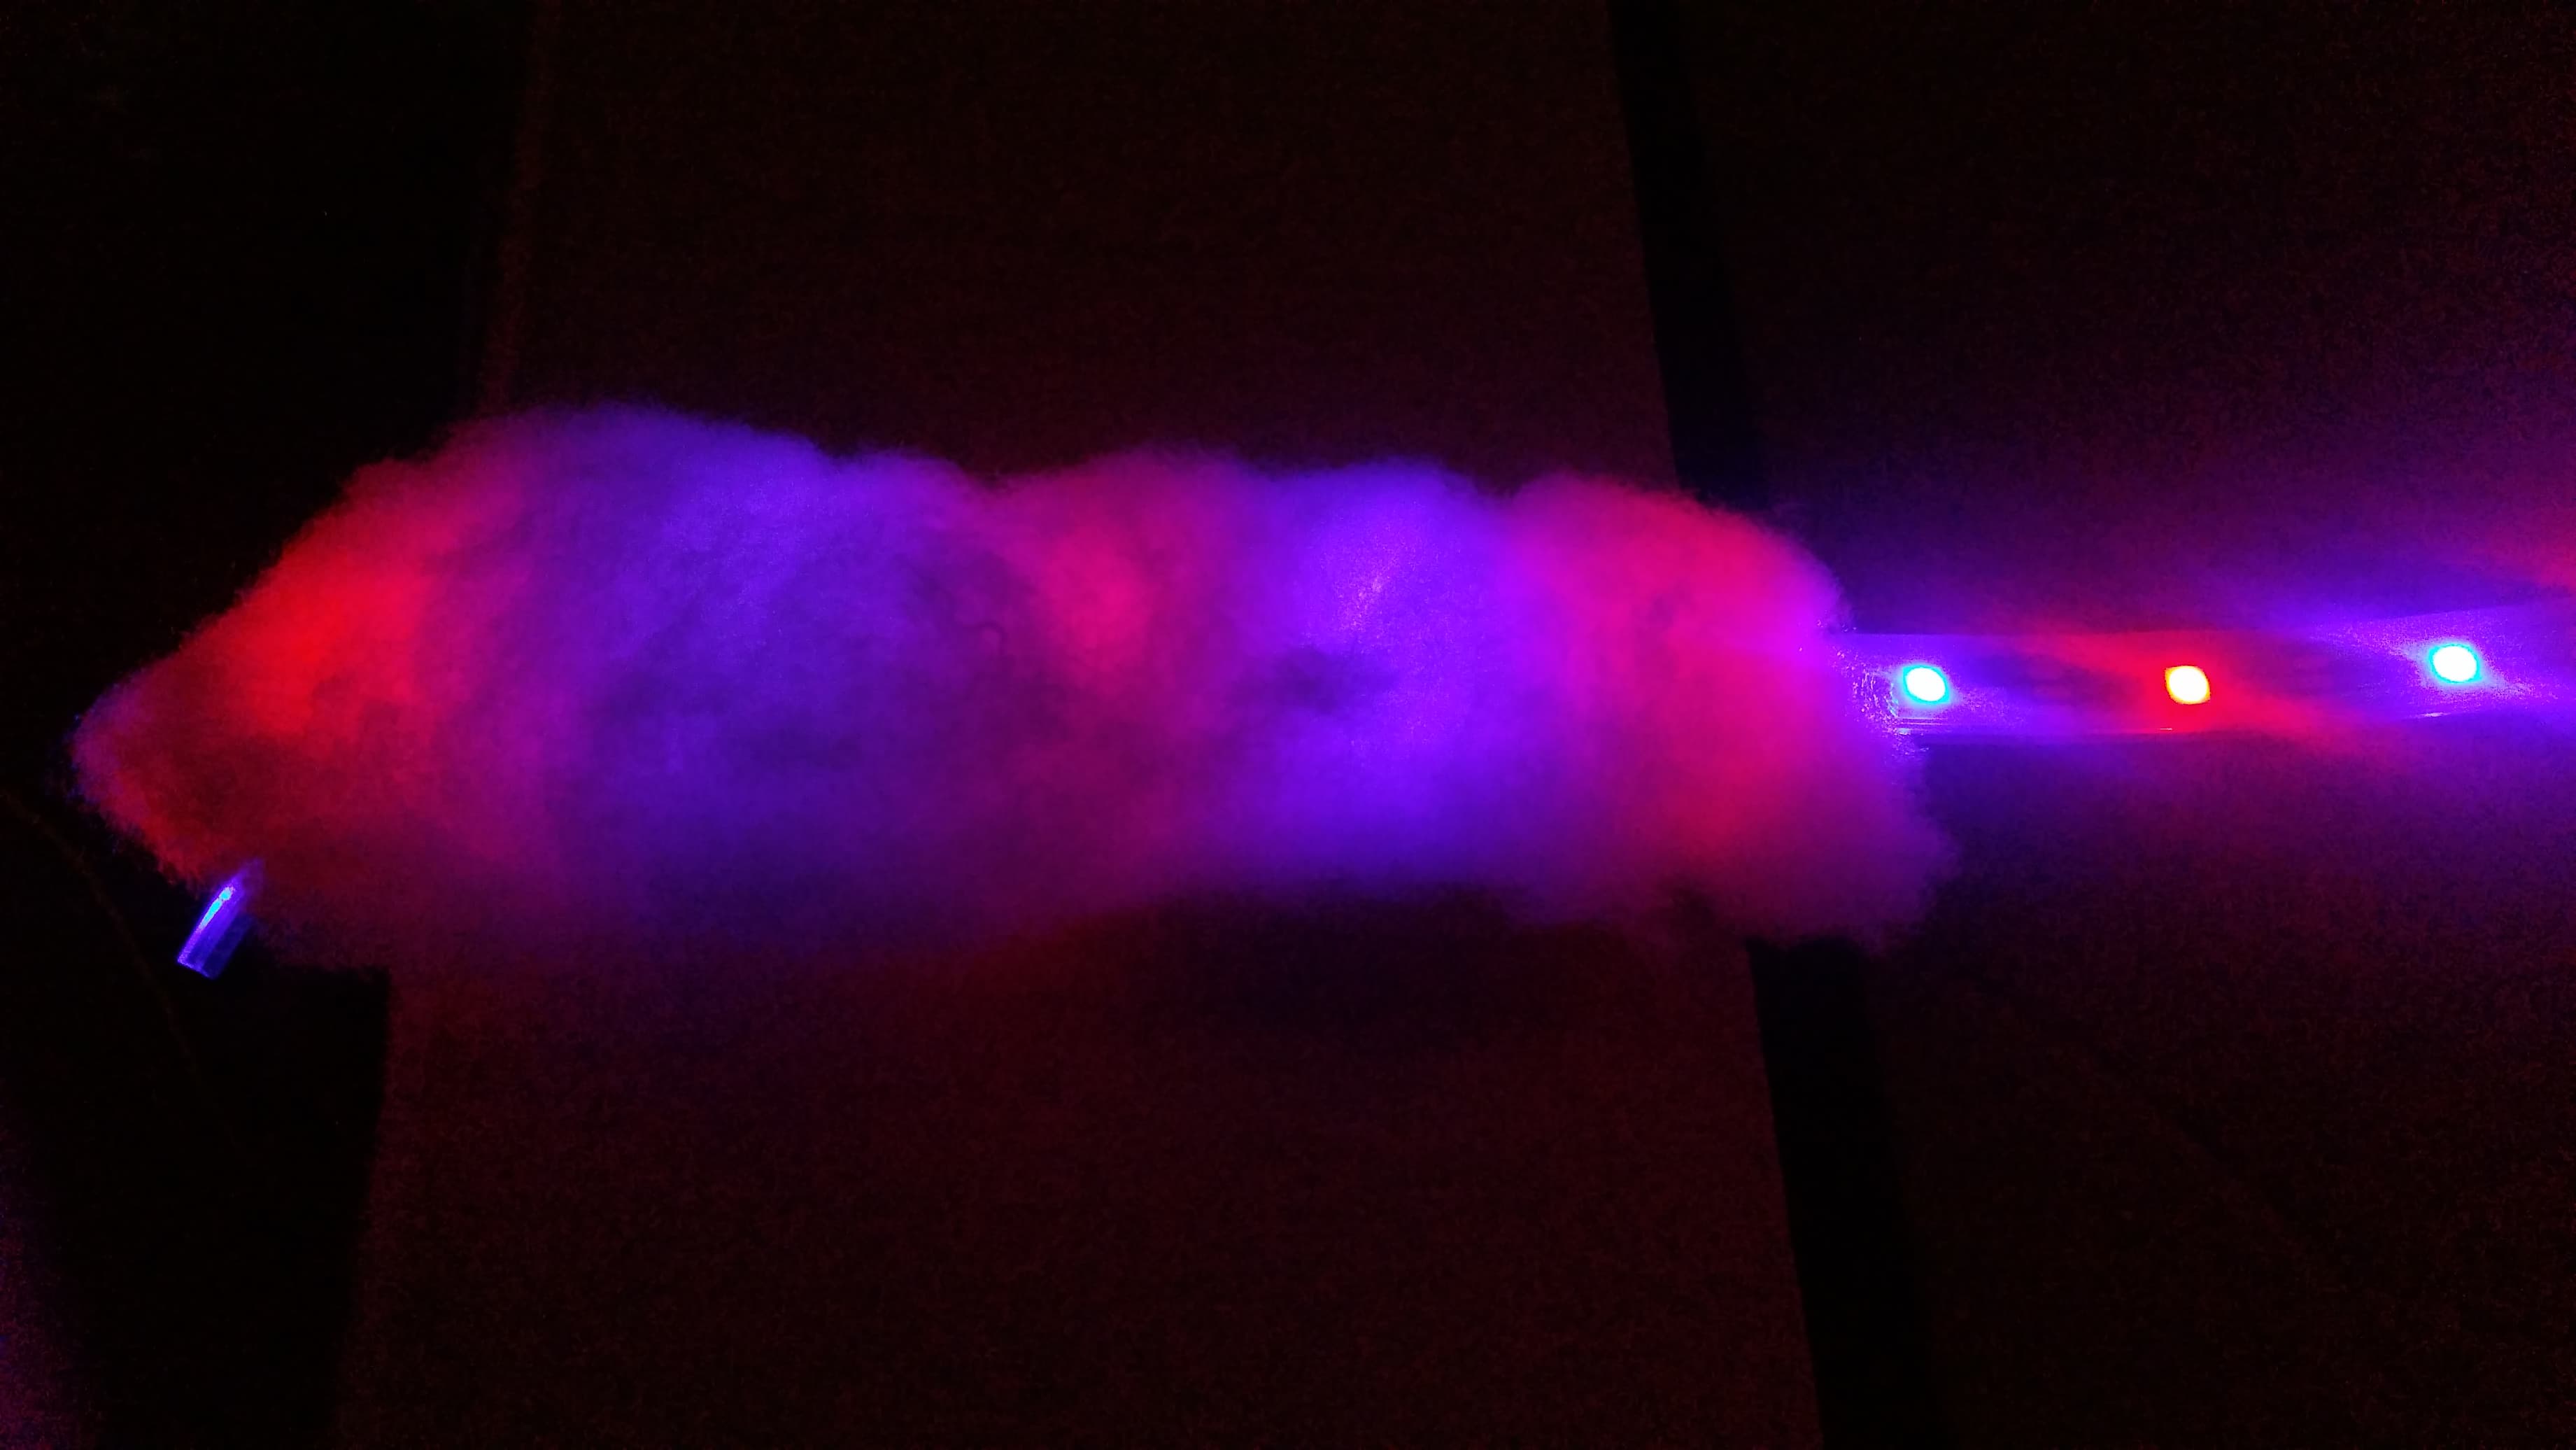 An LED light strip illuminating a handful of fiberfill material with purple and red. With the lights off